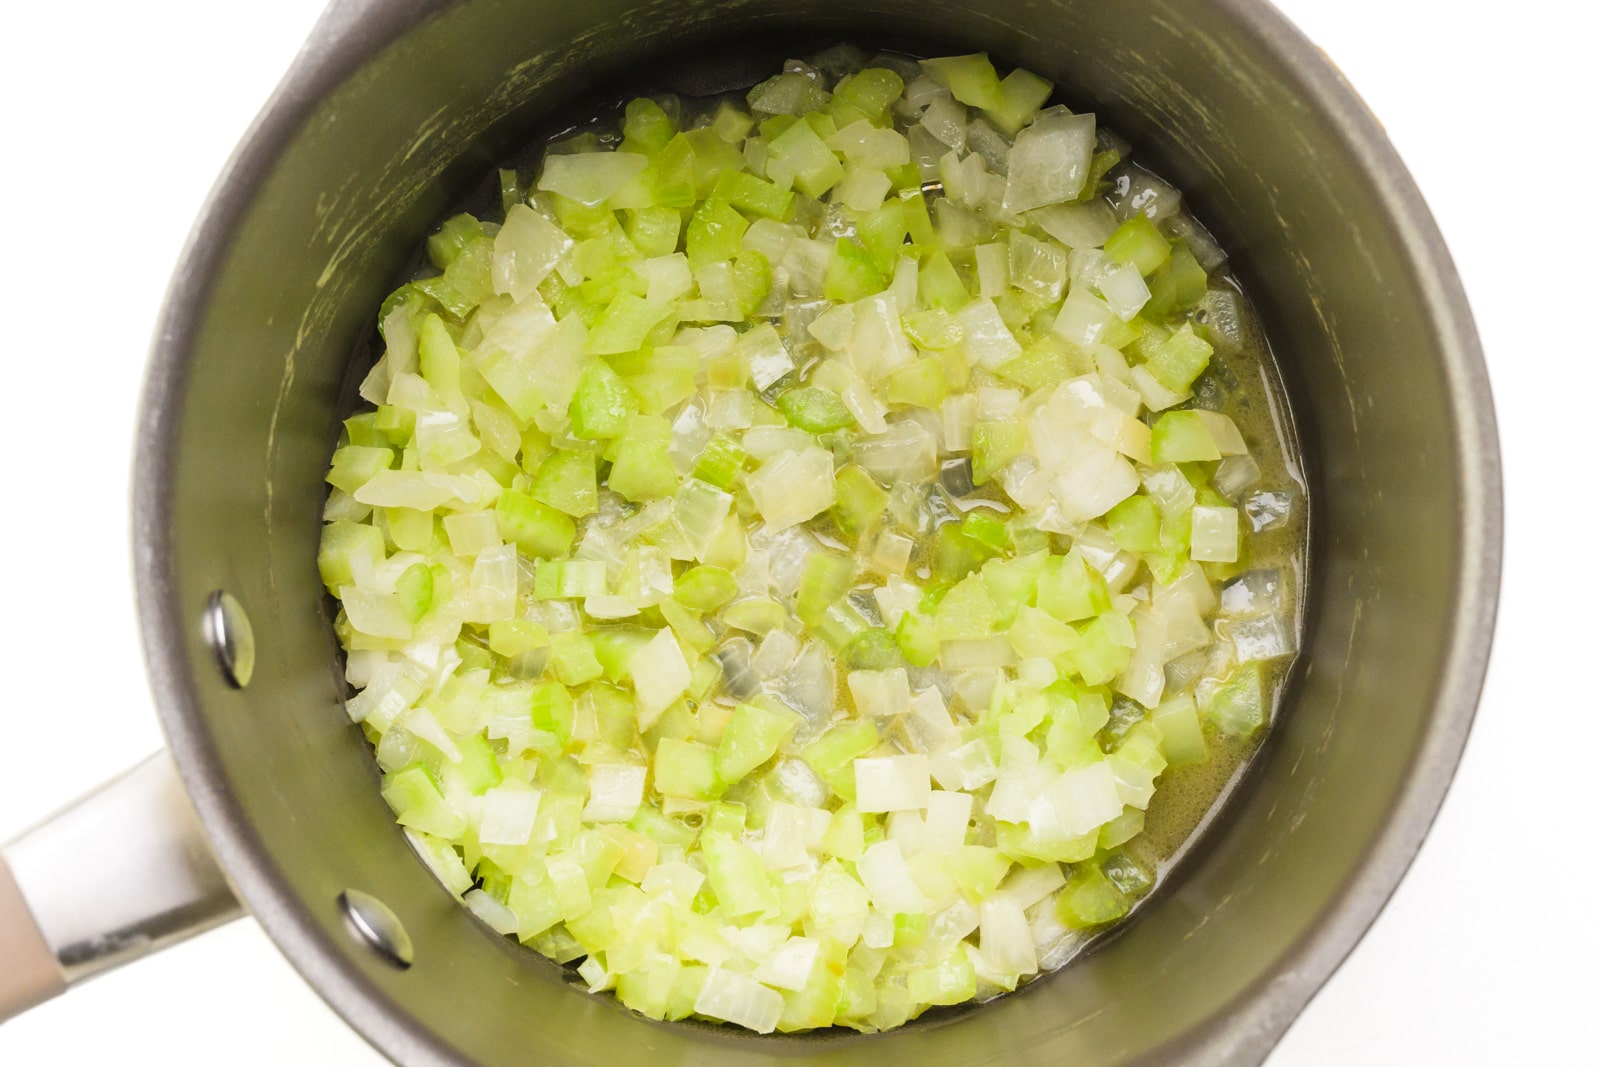 Onions and celery are cooking at the bottom of a saucepan.